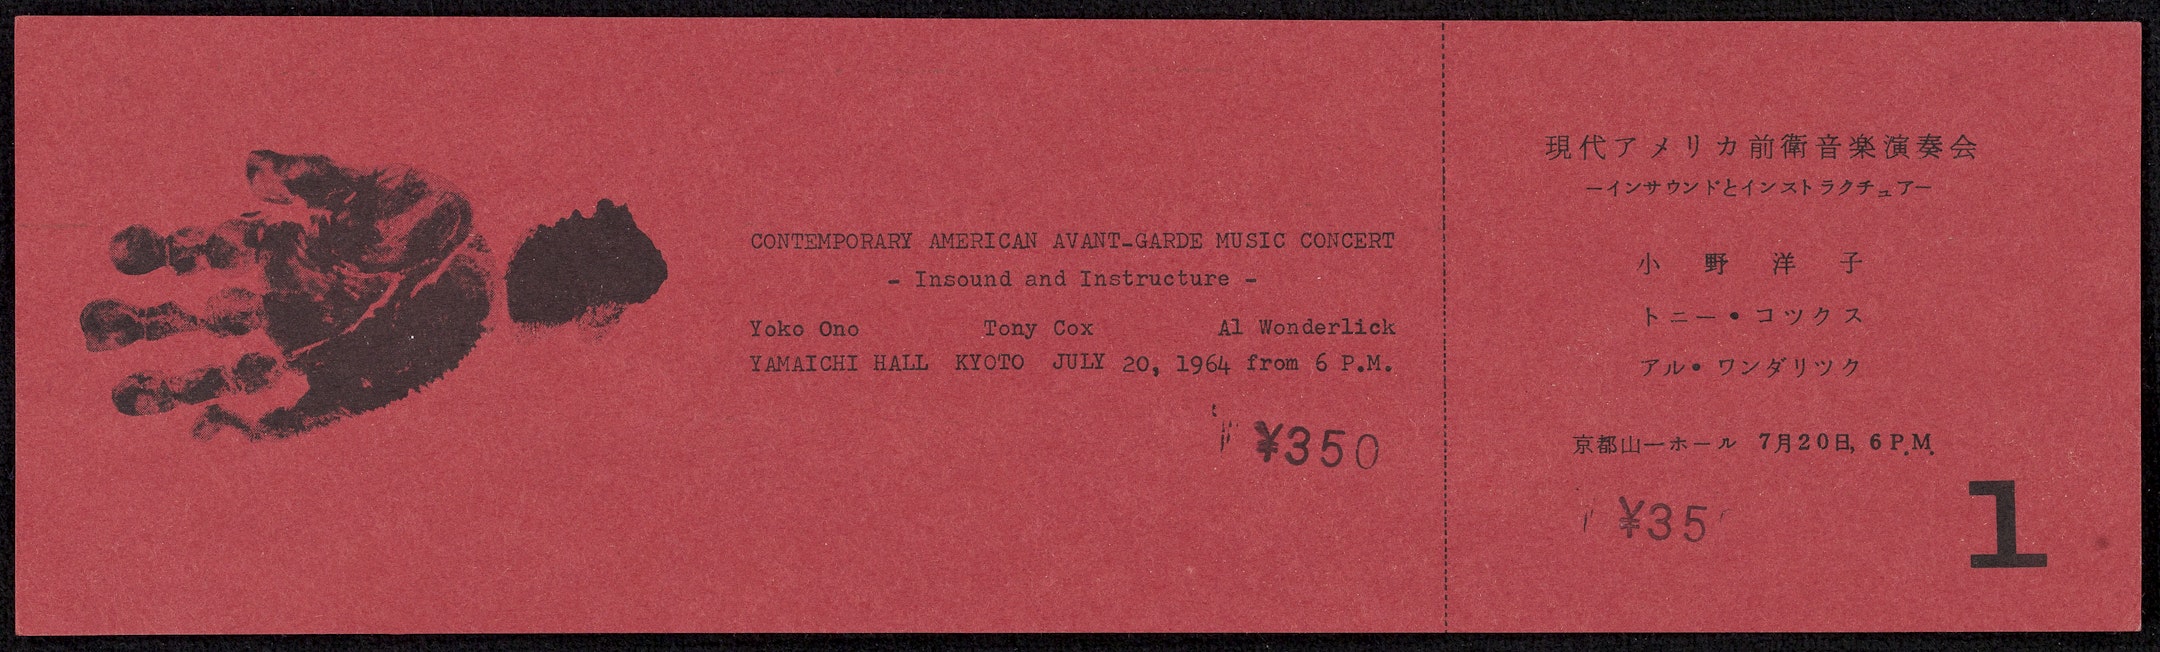 Ticket For Contemporary American Avant Garde Music Concert Insound And Instructure Yamaichi Hall Kyoto July 1964 One Of Three Kyoto Events